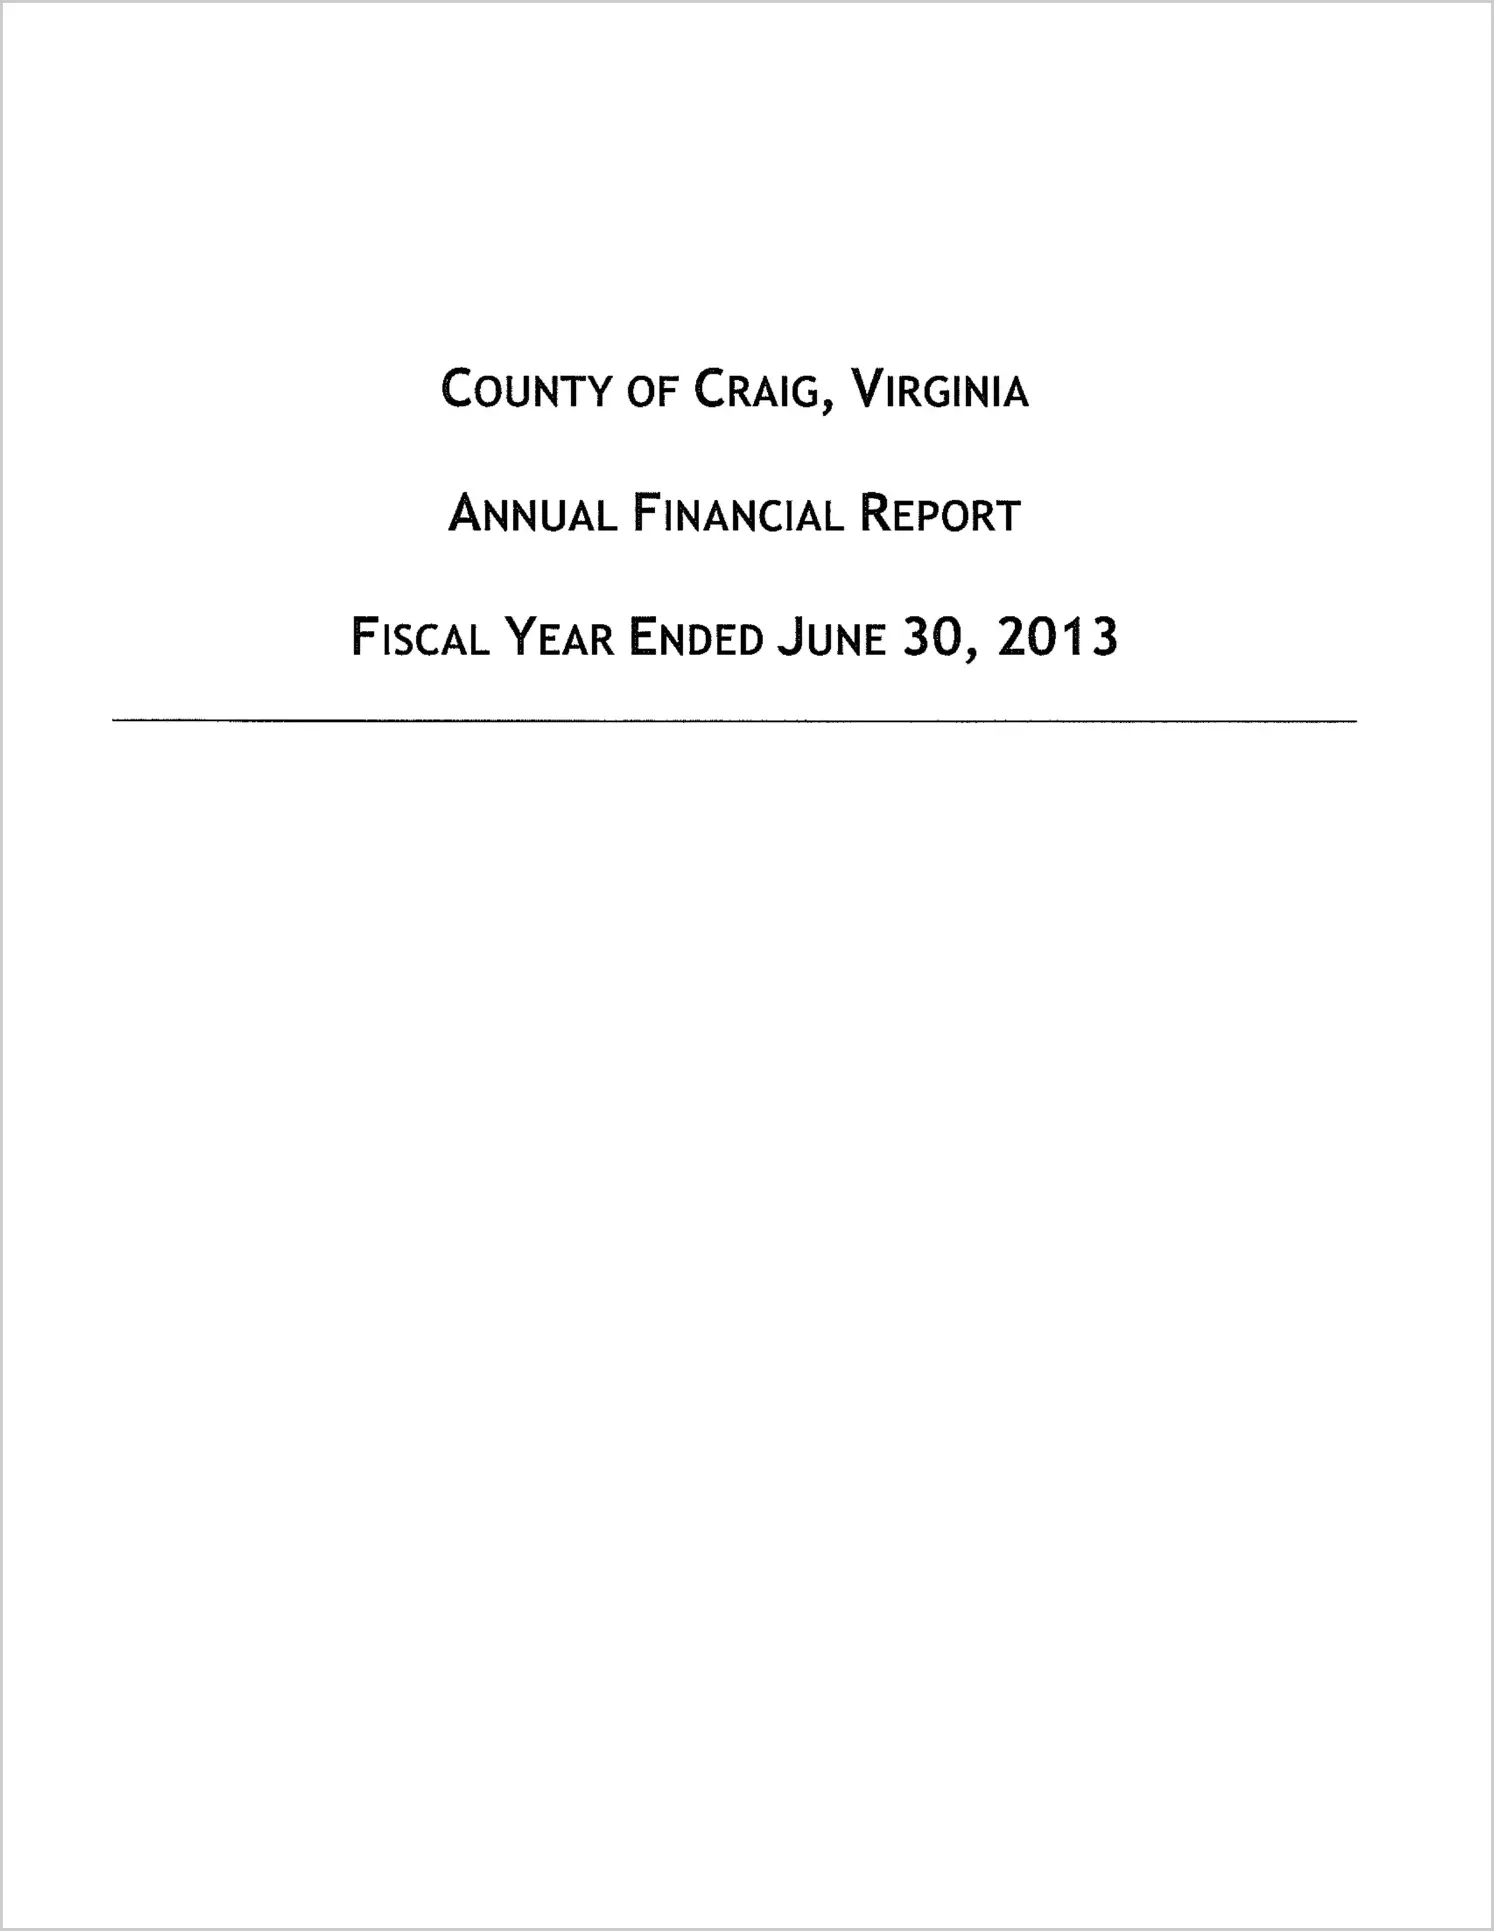 2013 Annual Financial Report for County of Craig